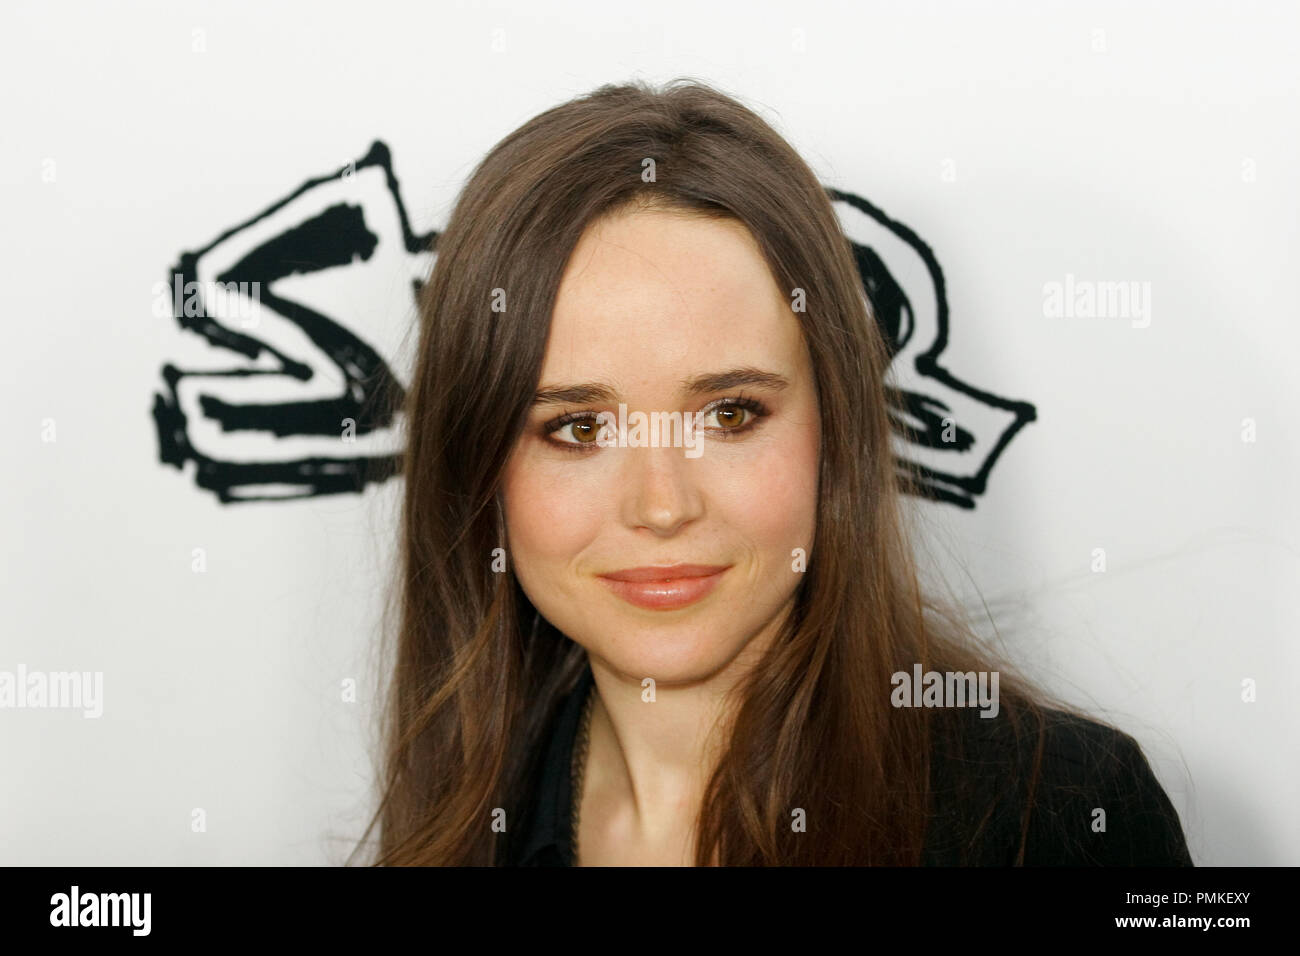 Ellen Page at the Premiere of IFC Midnight's 'Super'. Arrivals held at The Egyptian Theater in Hollywood, CA, March 21, 2011.  Photo by Joe Martinez / PictureLux Stock Photo